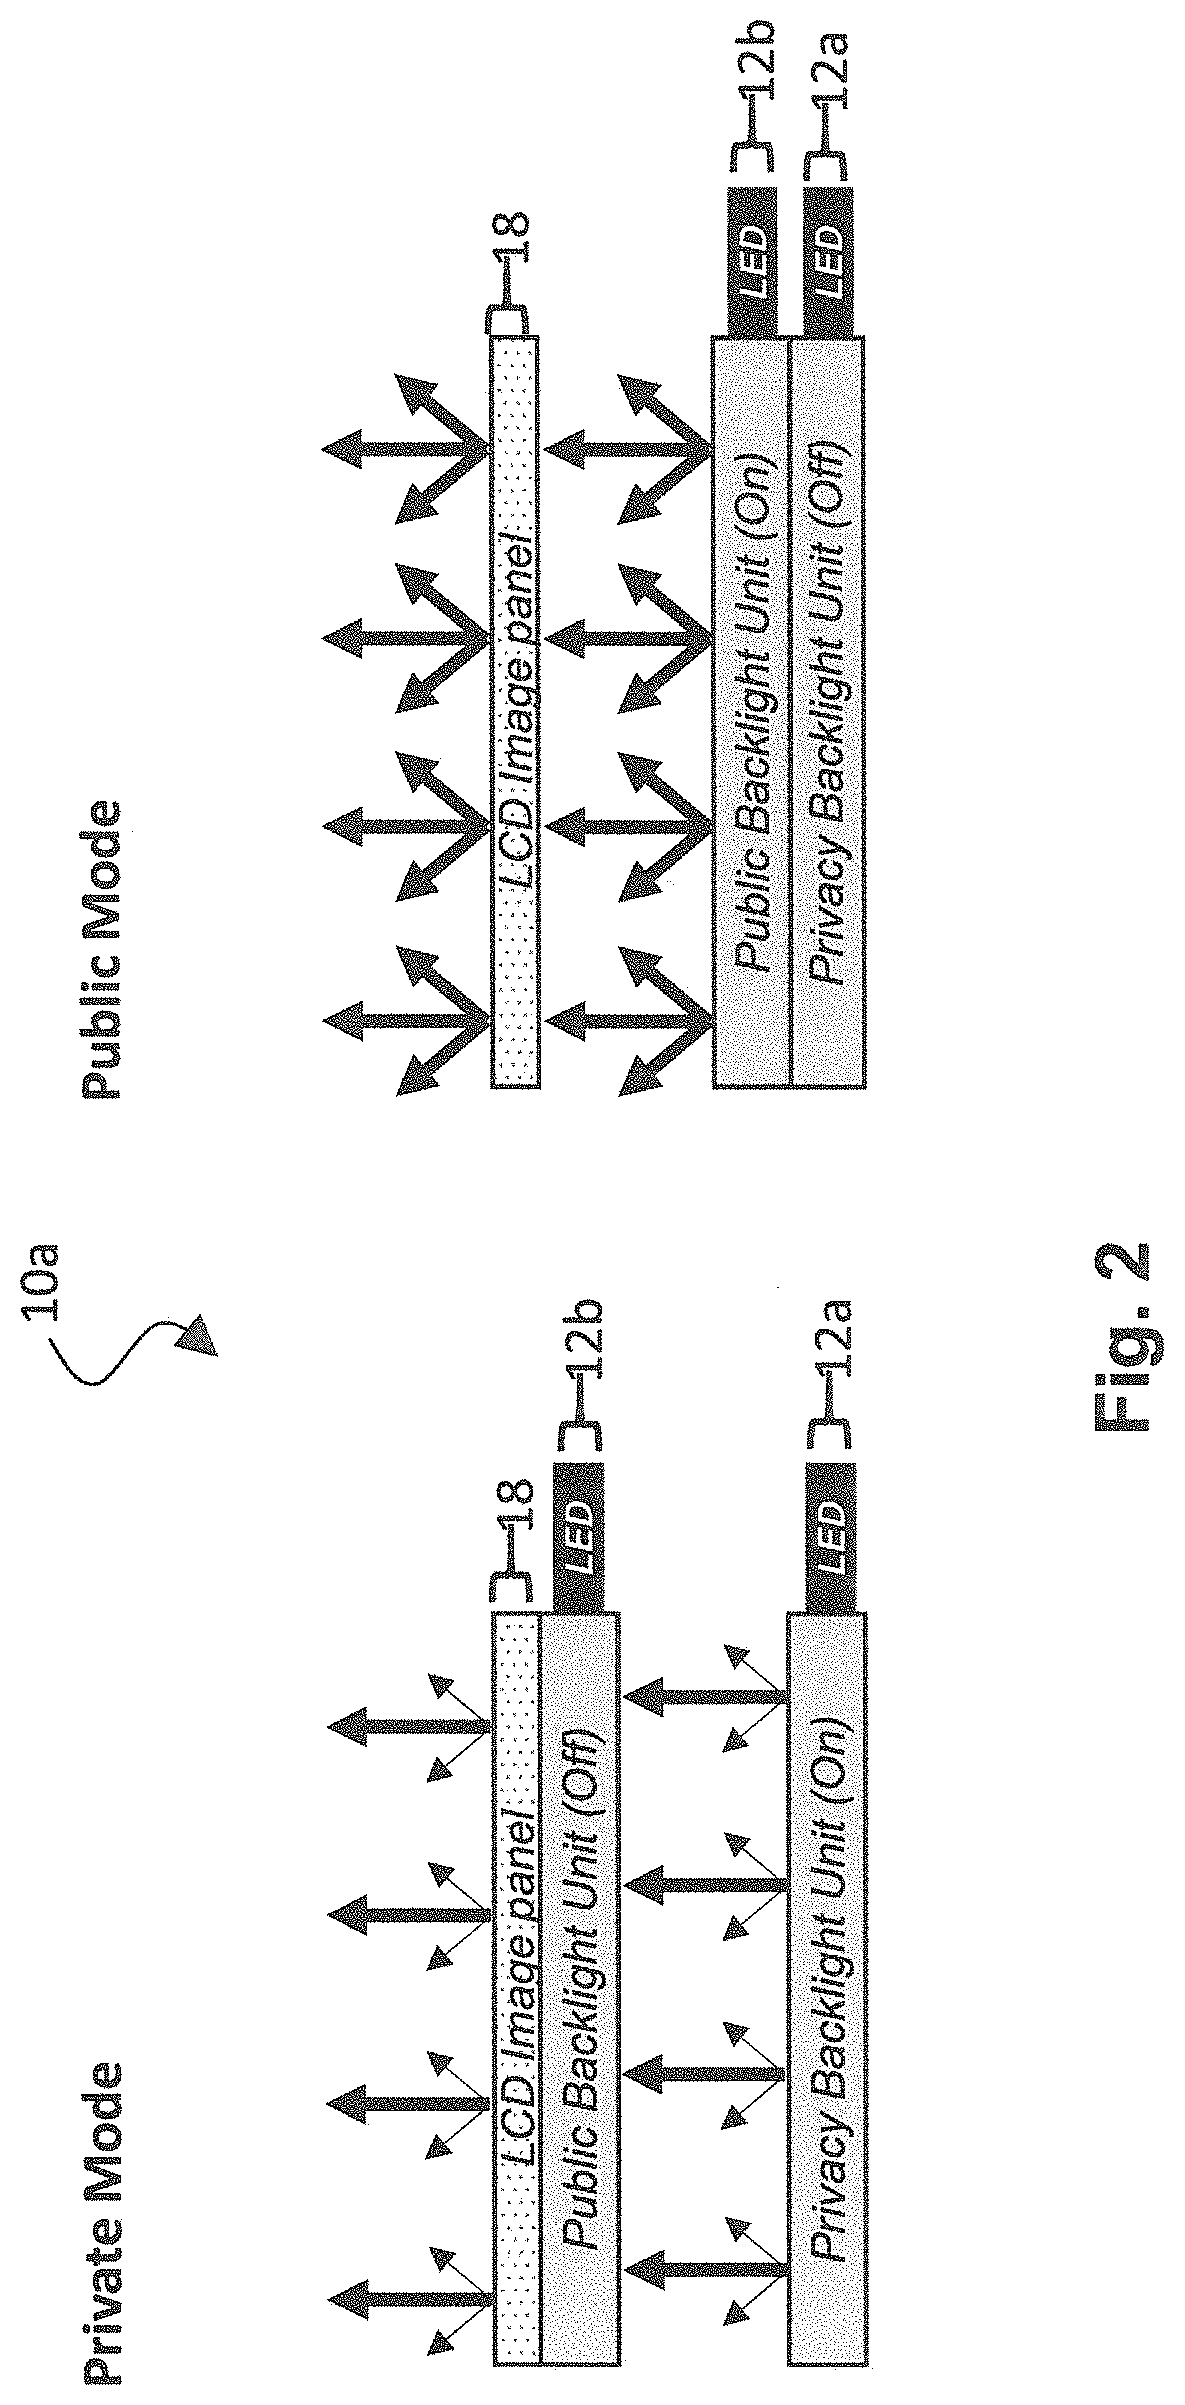 Enhanced privacy switchable backlight system